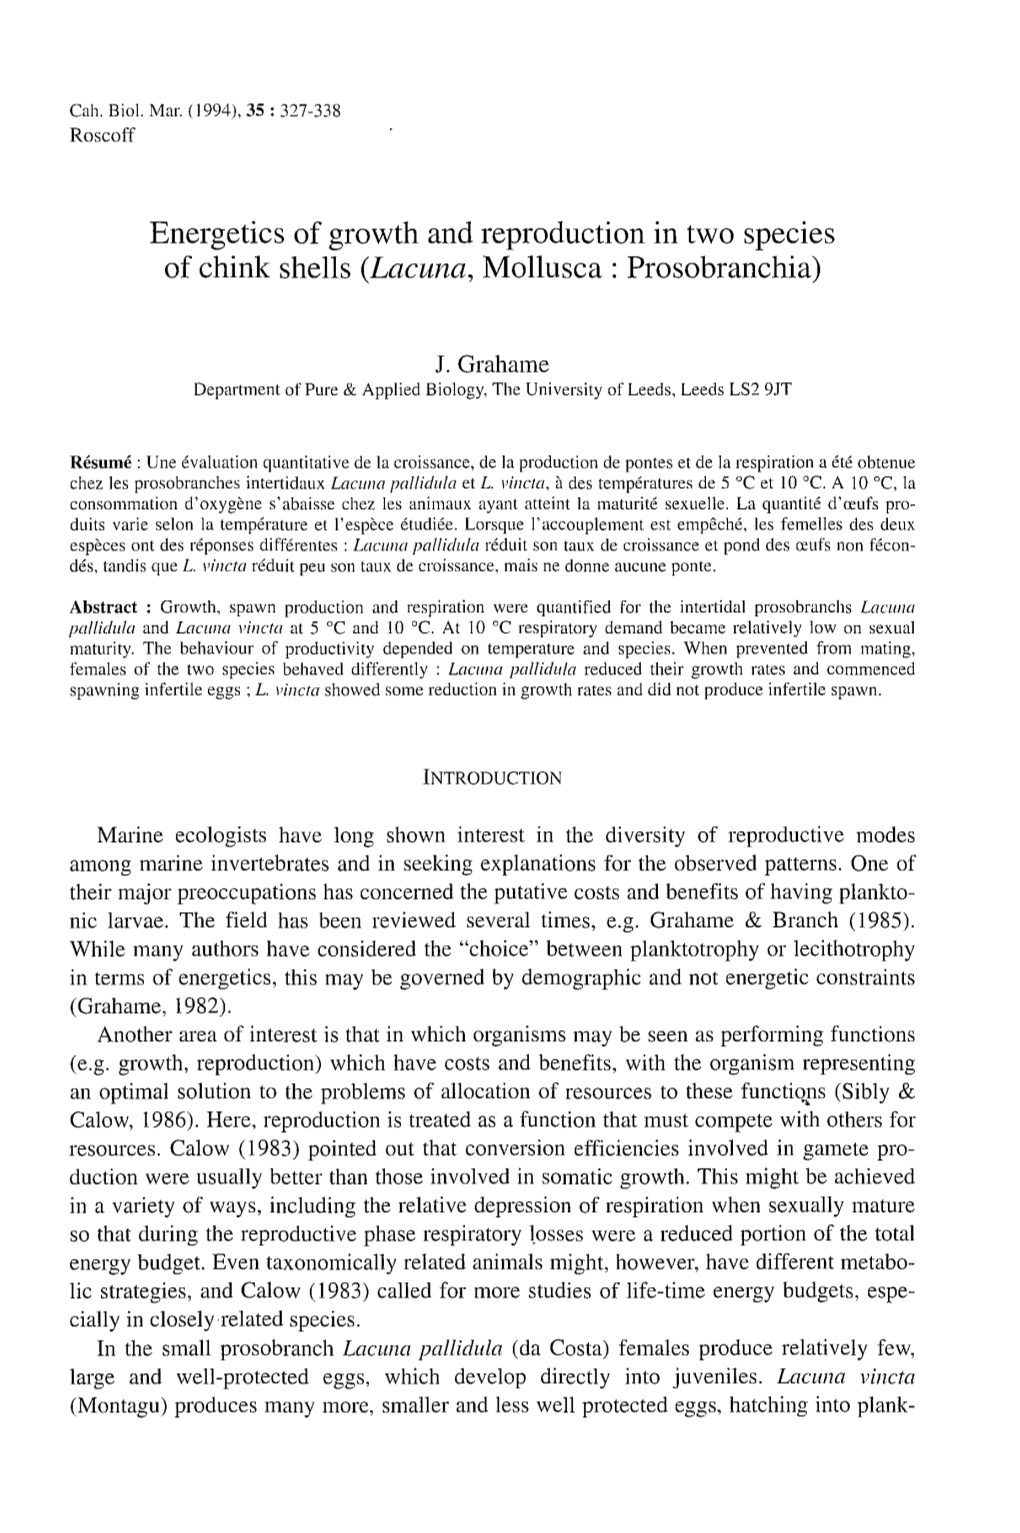 Energetics of Growth and Reproduction in Two Species of Chink Shells (Lacuna, Mollusca : Prosobranchia)